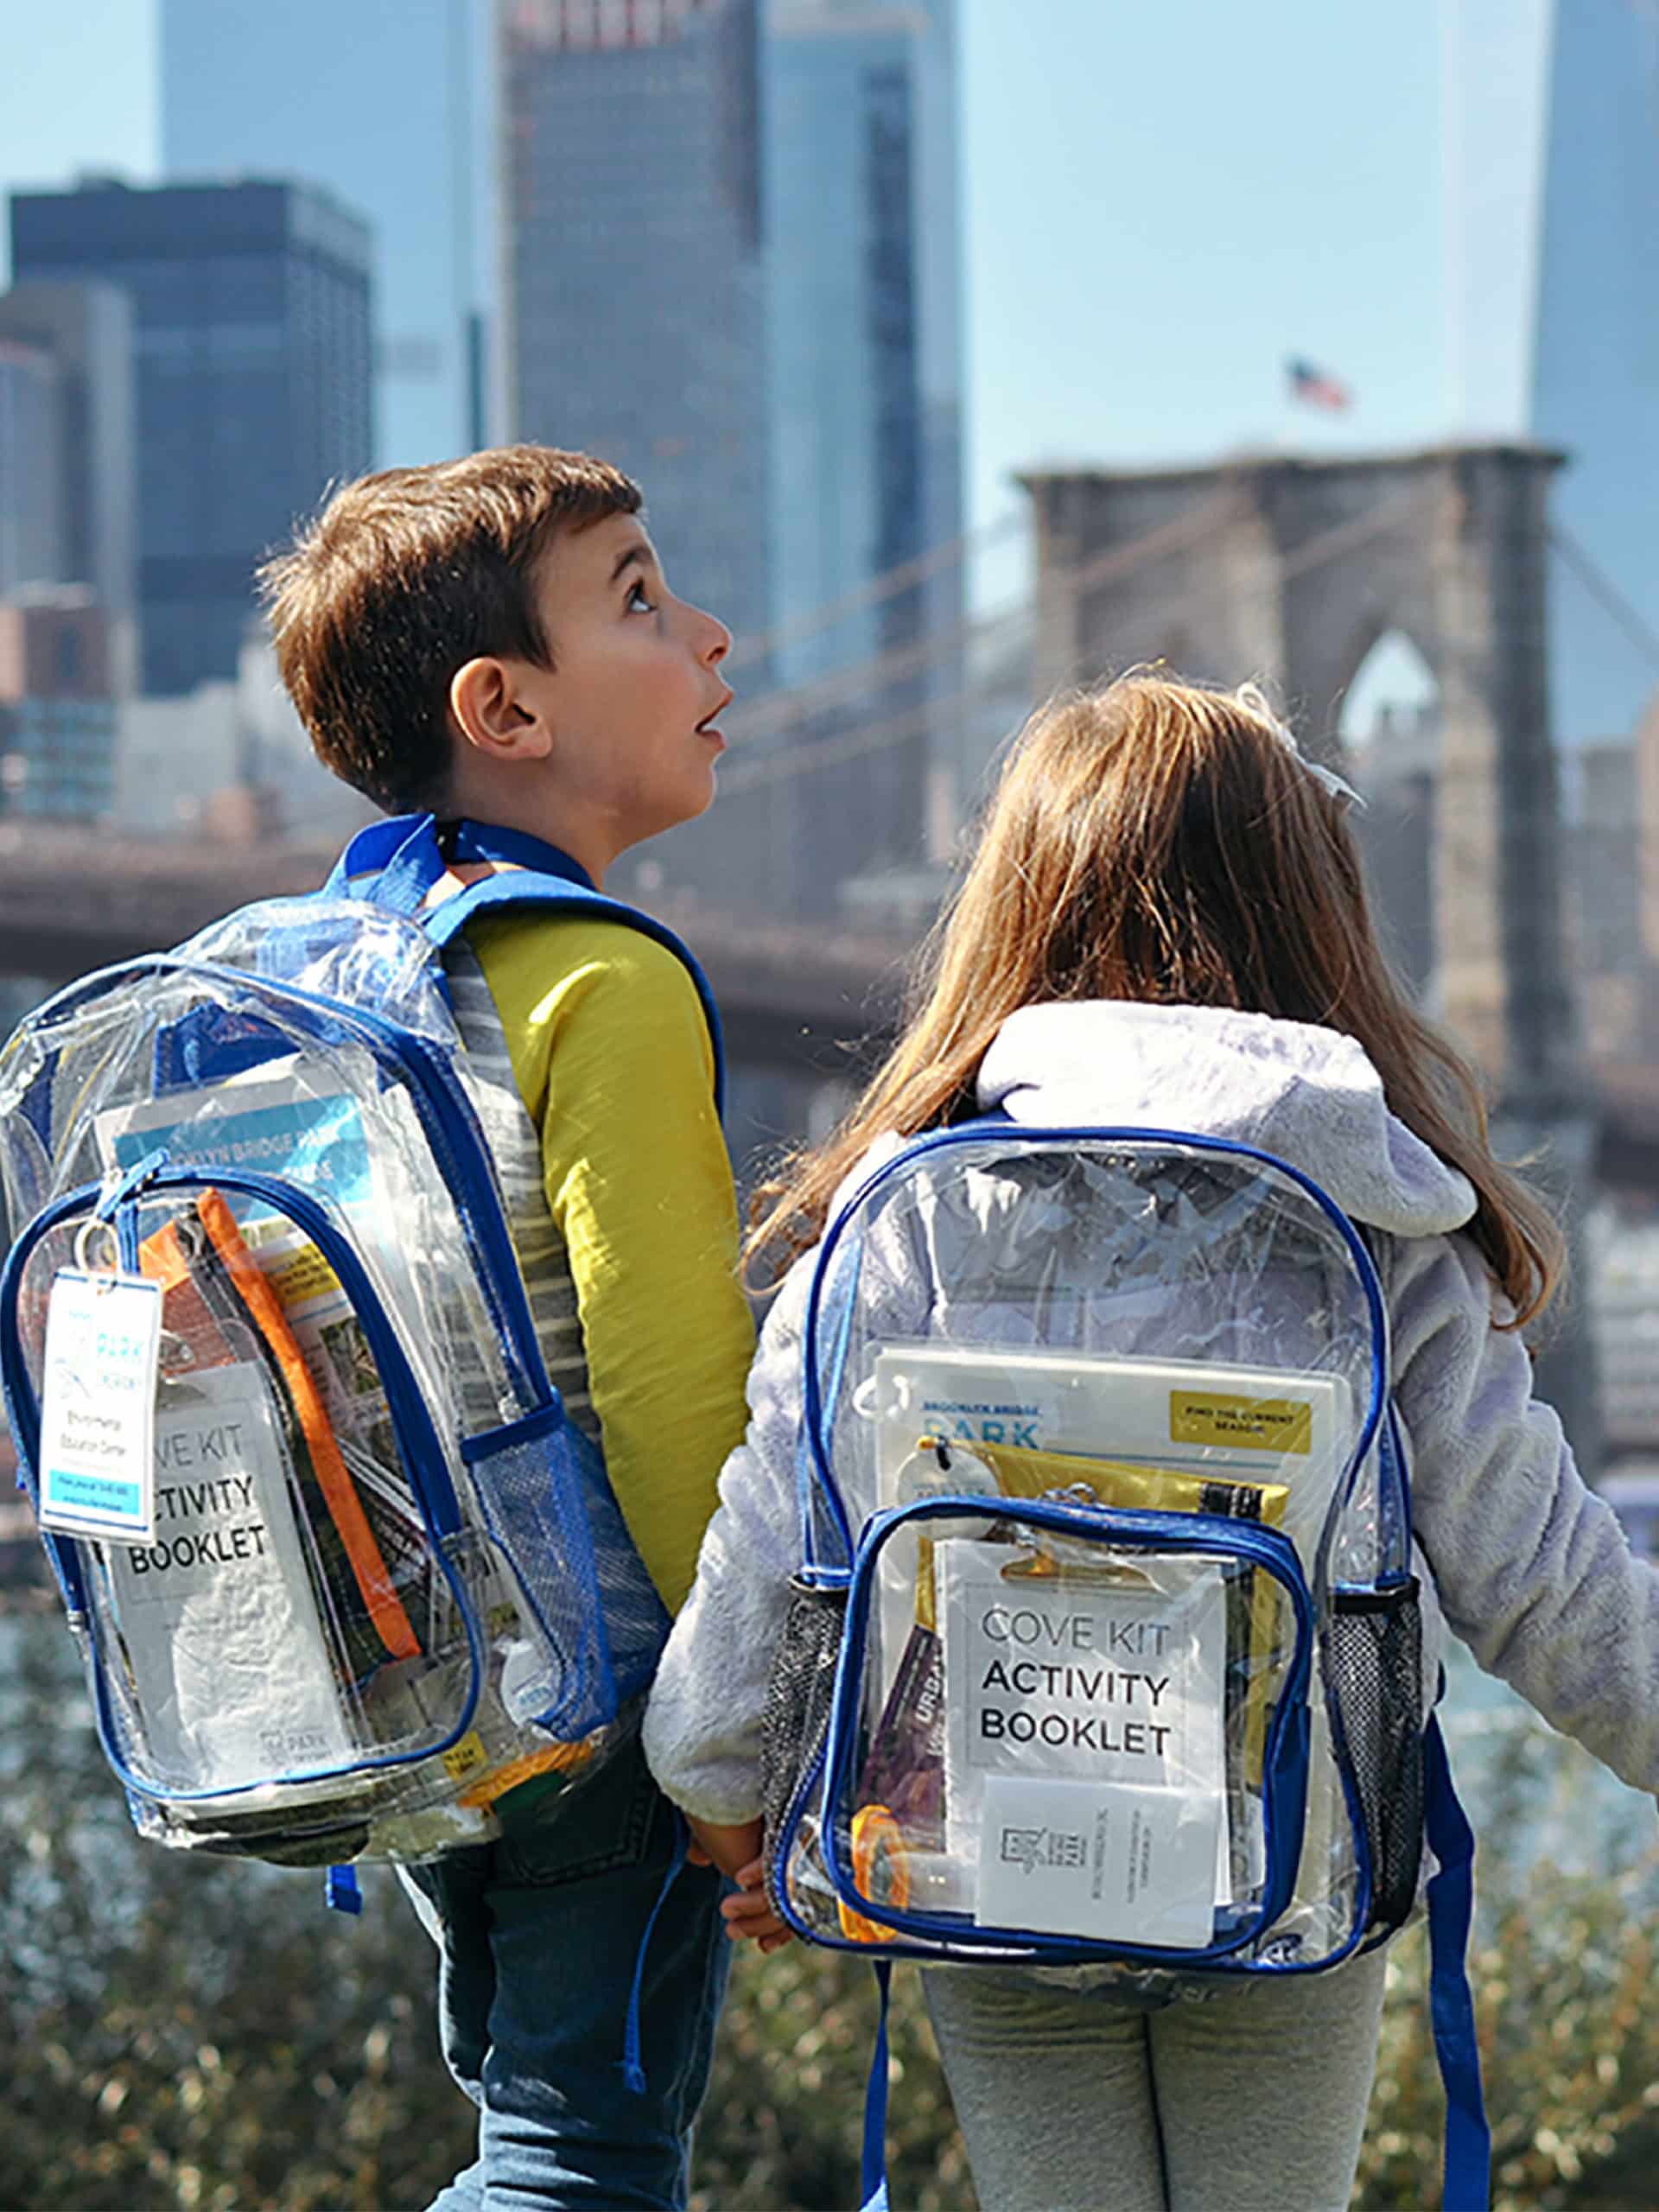 Two children holding hands with Cove Kit backpacks on.